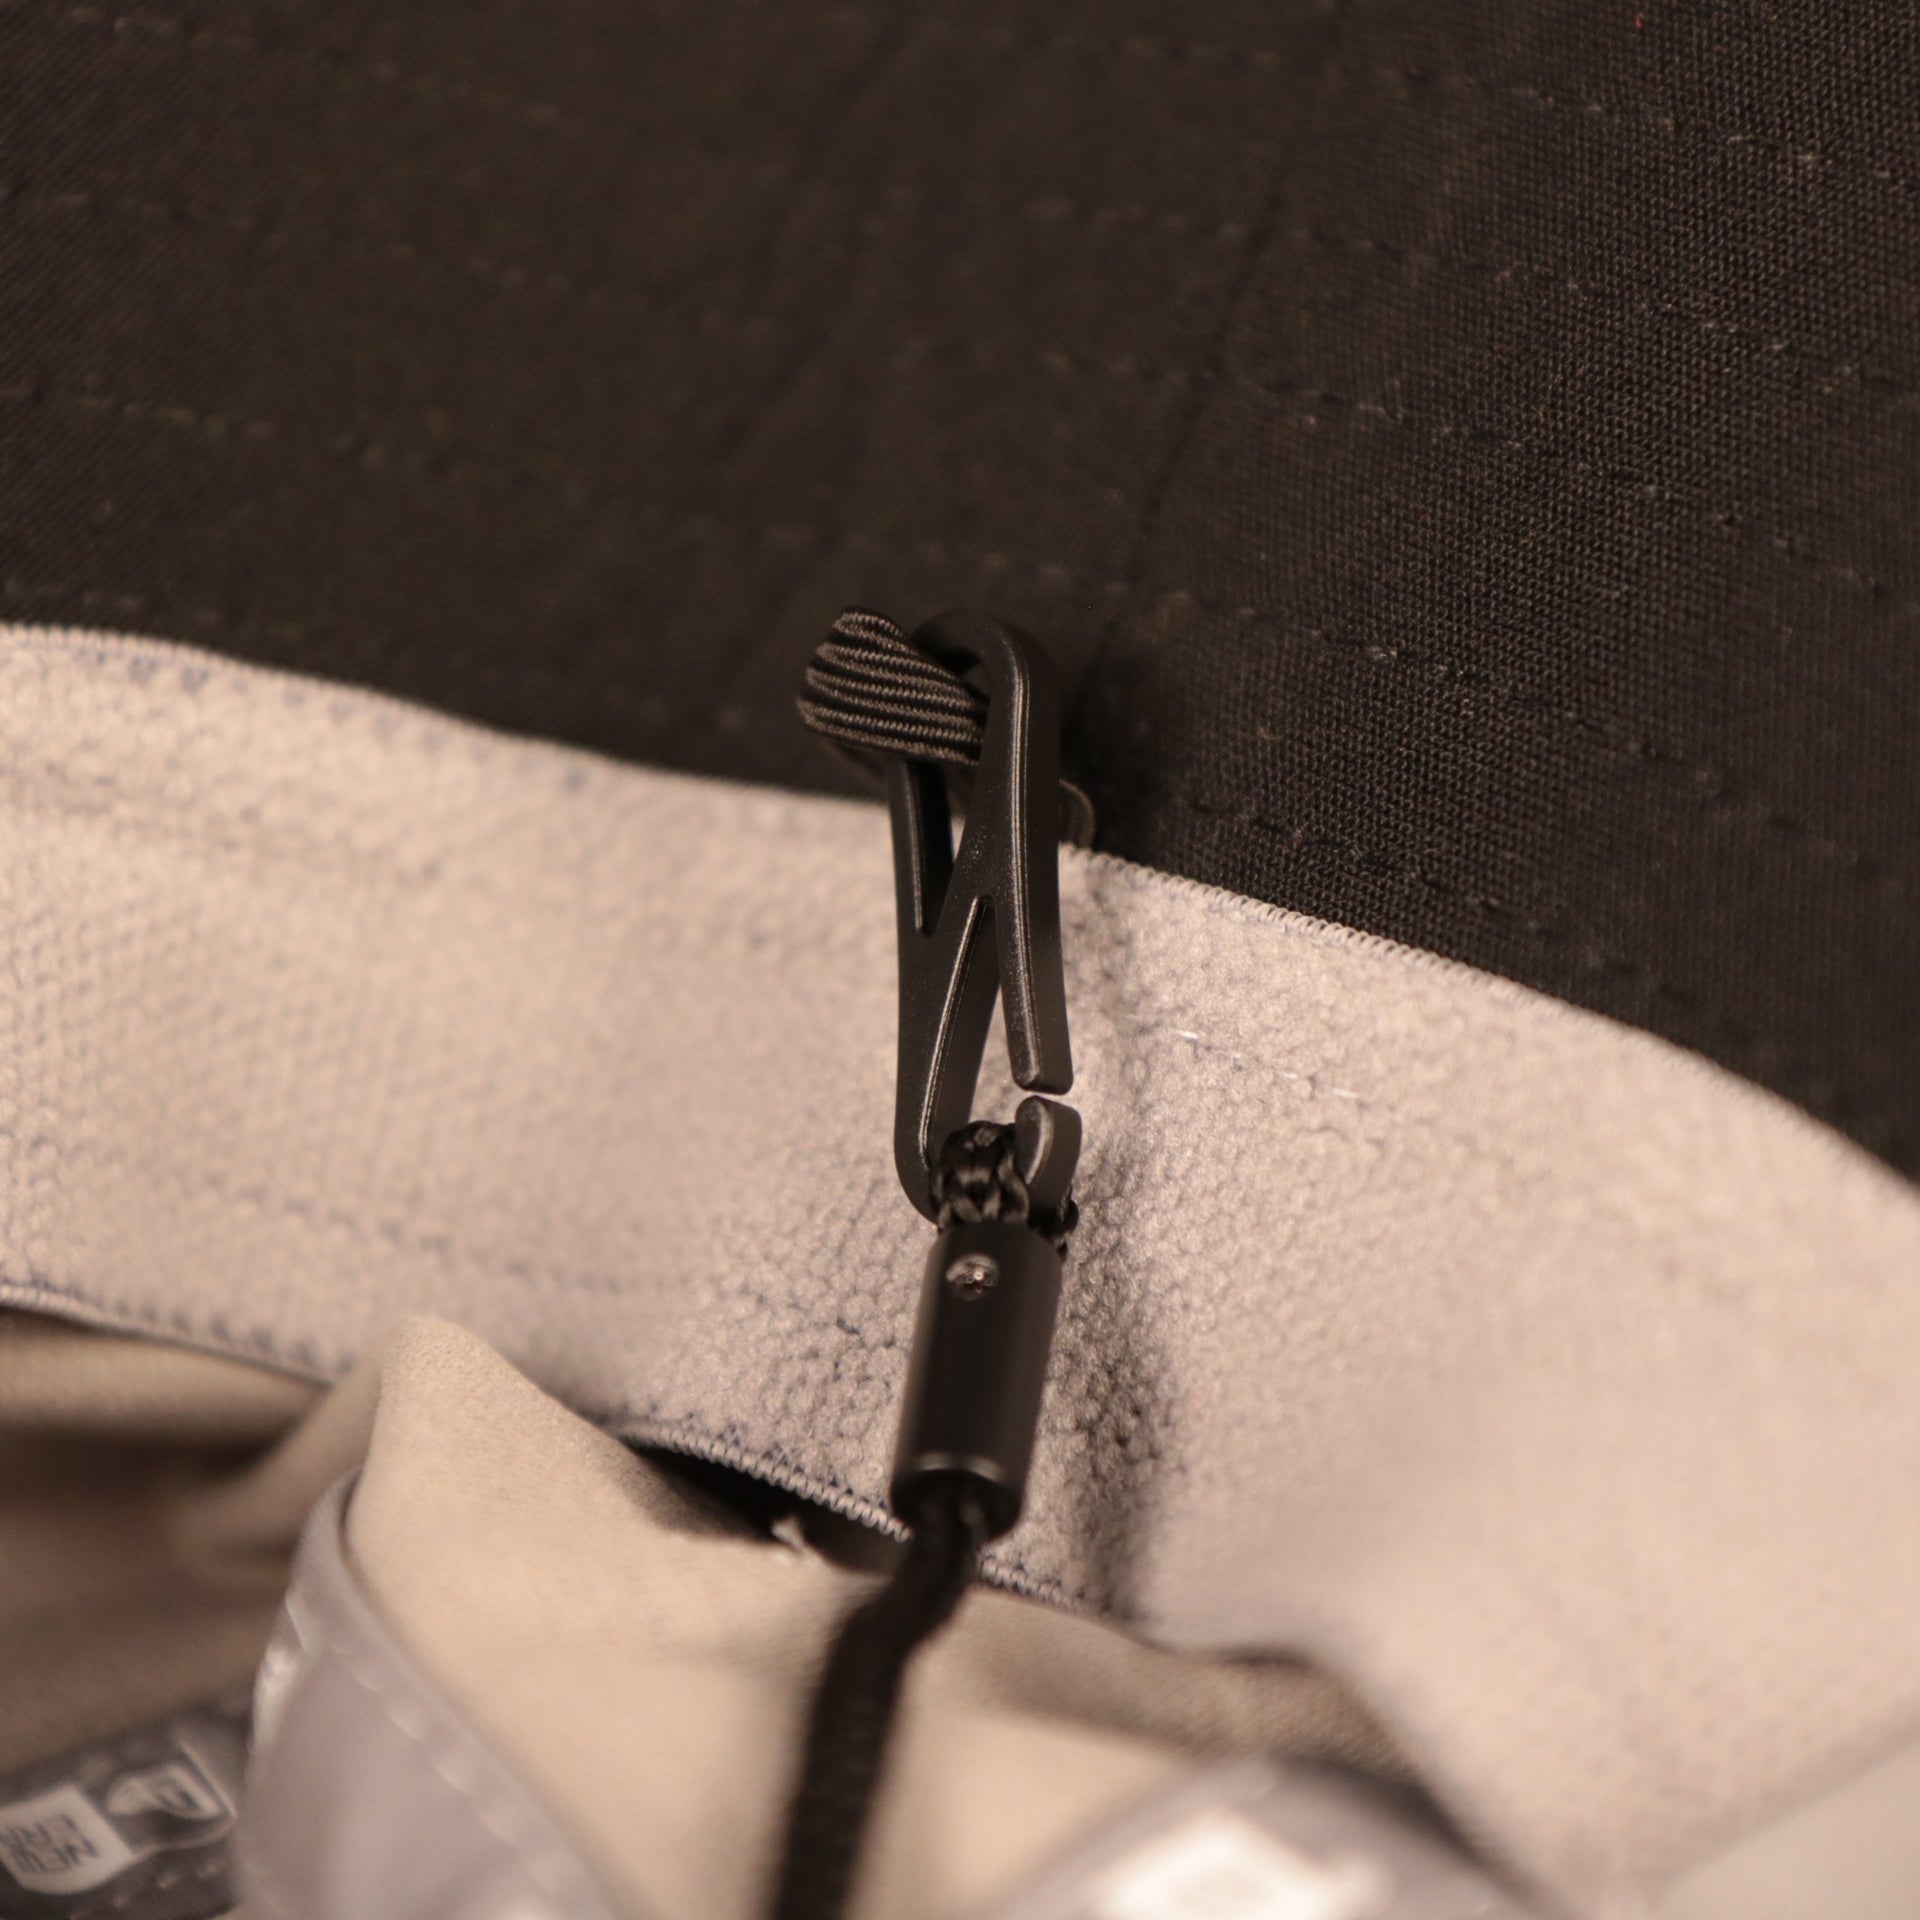 A closeup shot of the adjustable strings of the gray nfl on field training bucket hat carolina panthers by New Era.